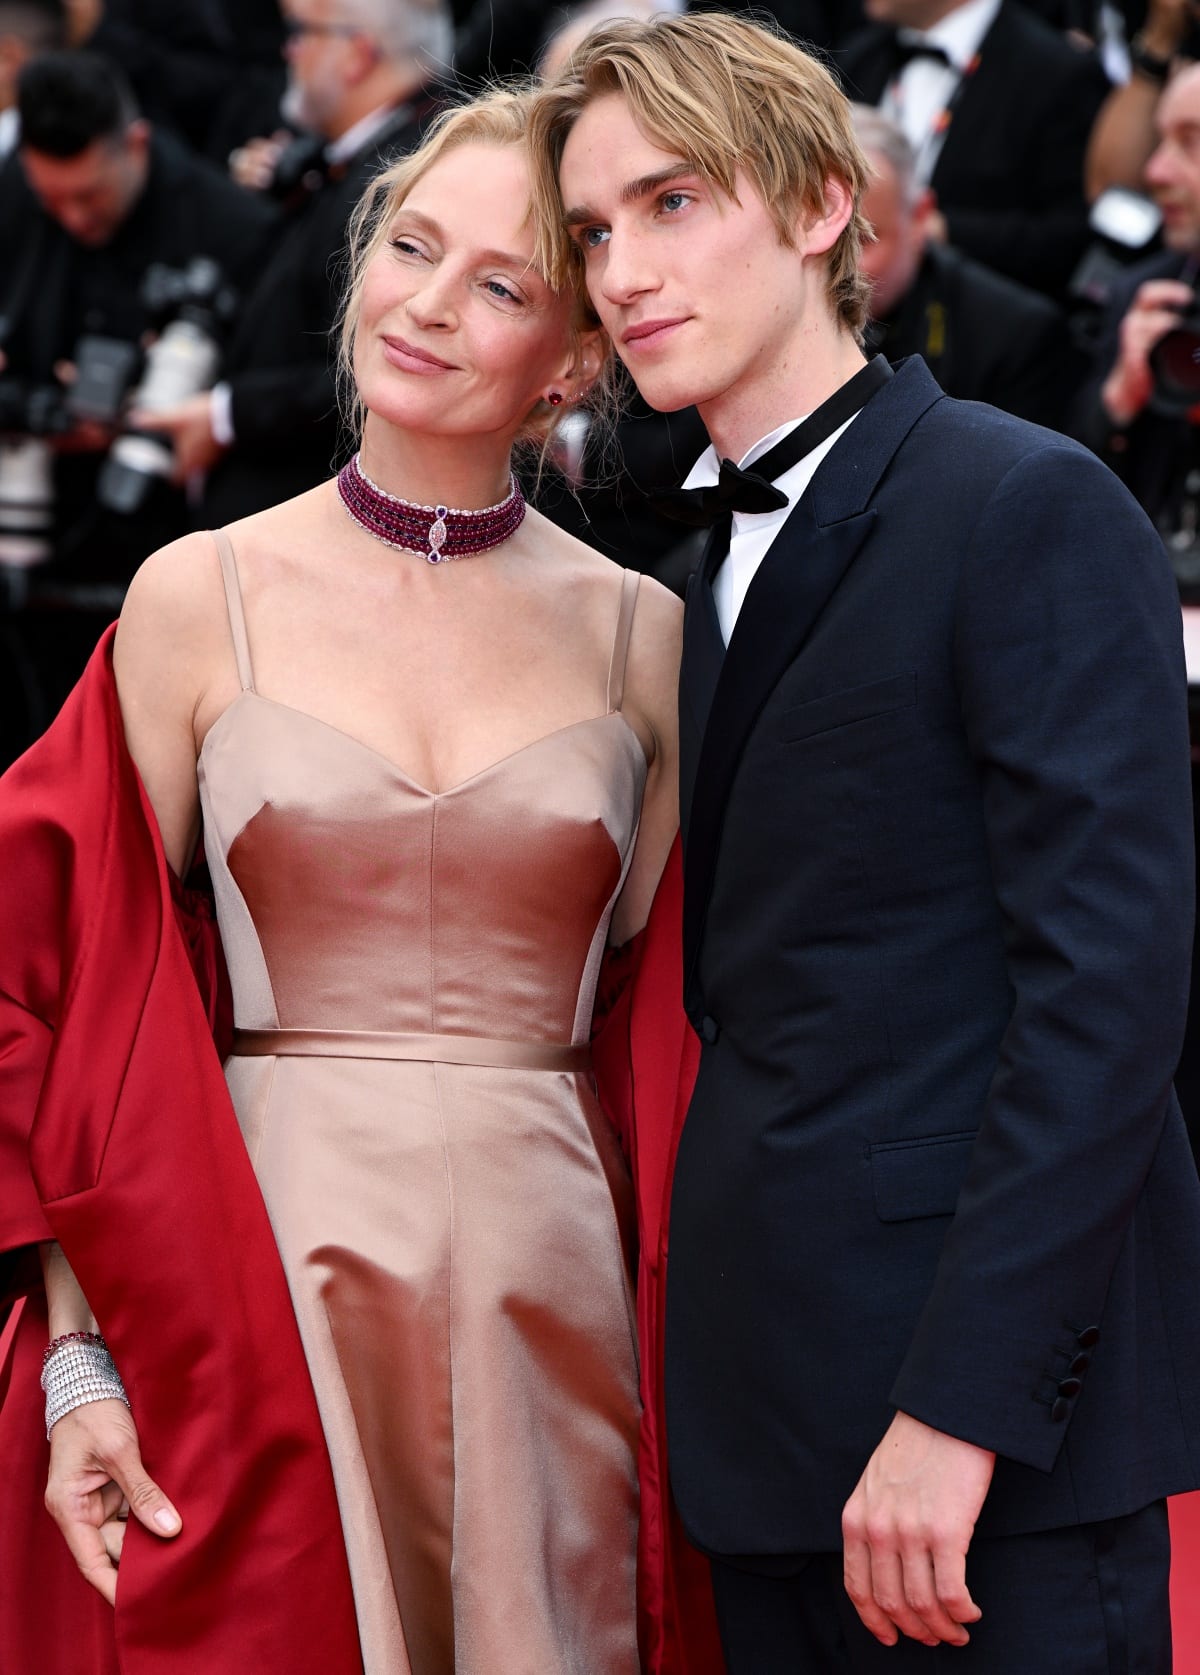 Uma Thurman with son Levon Hawke at the Jeanne du Barry screening and opening ceremony of the 76th Cannes Film Festival